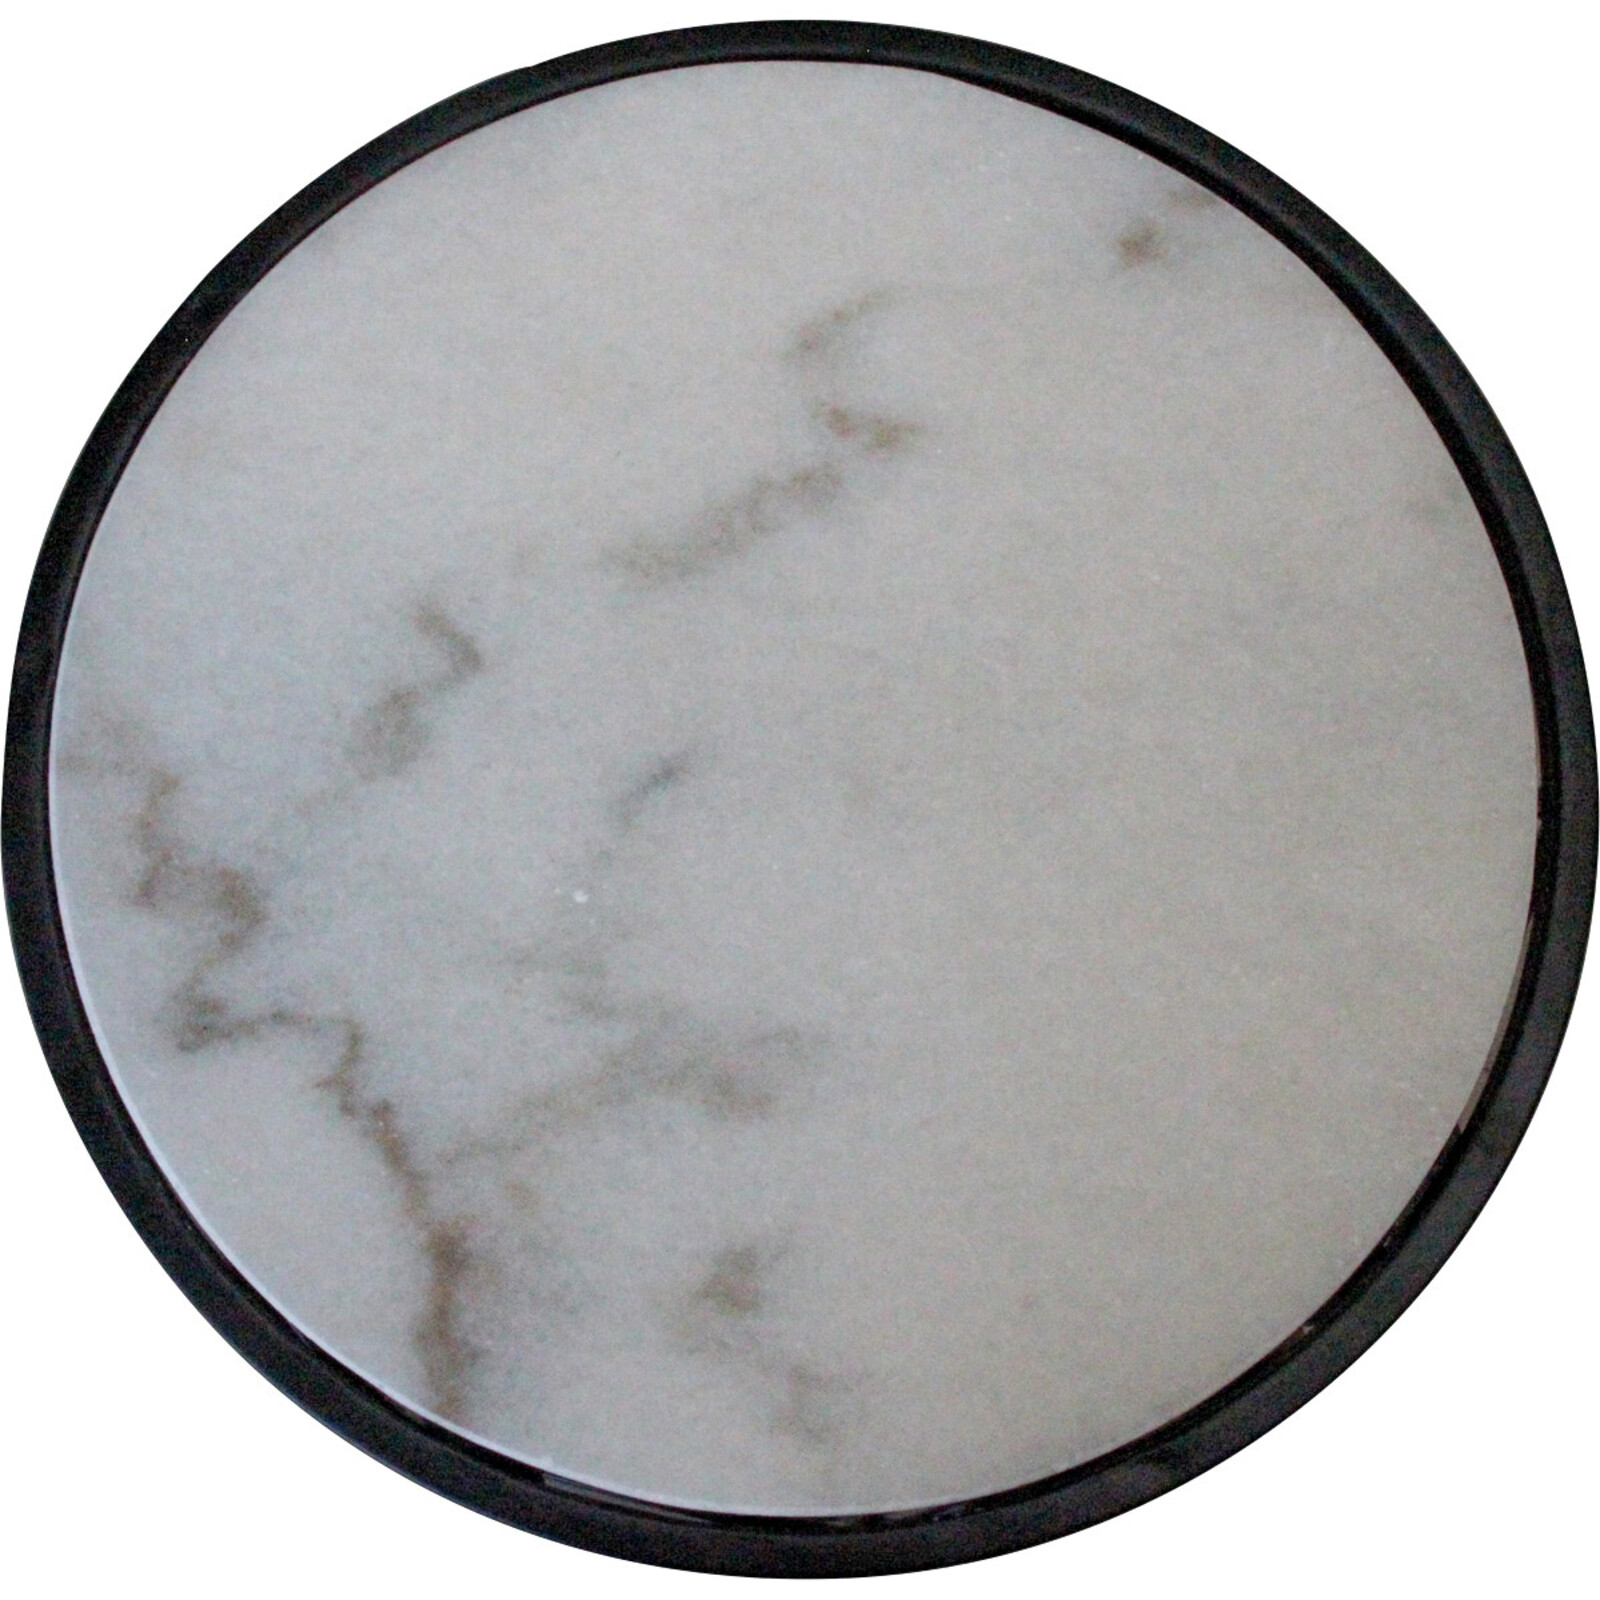 Drum Tables Marble S/2